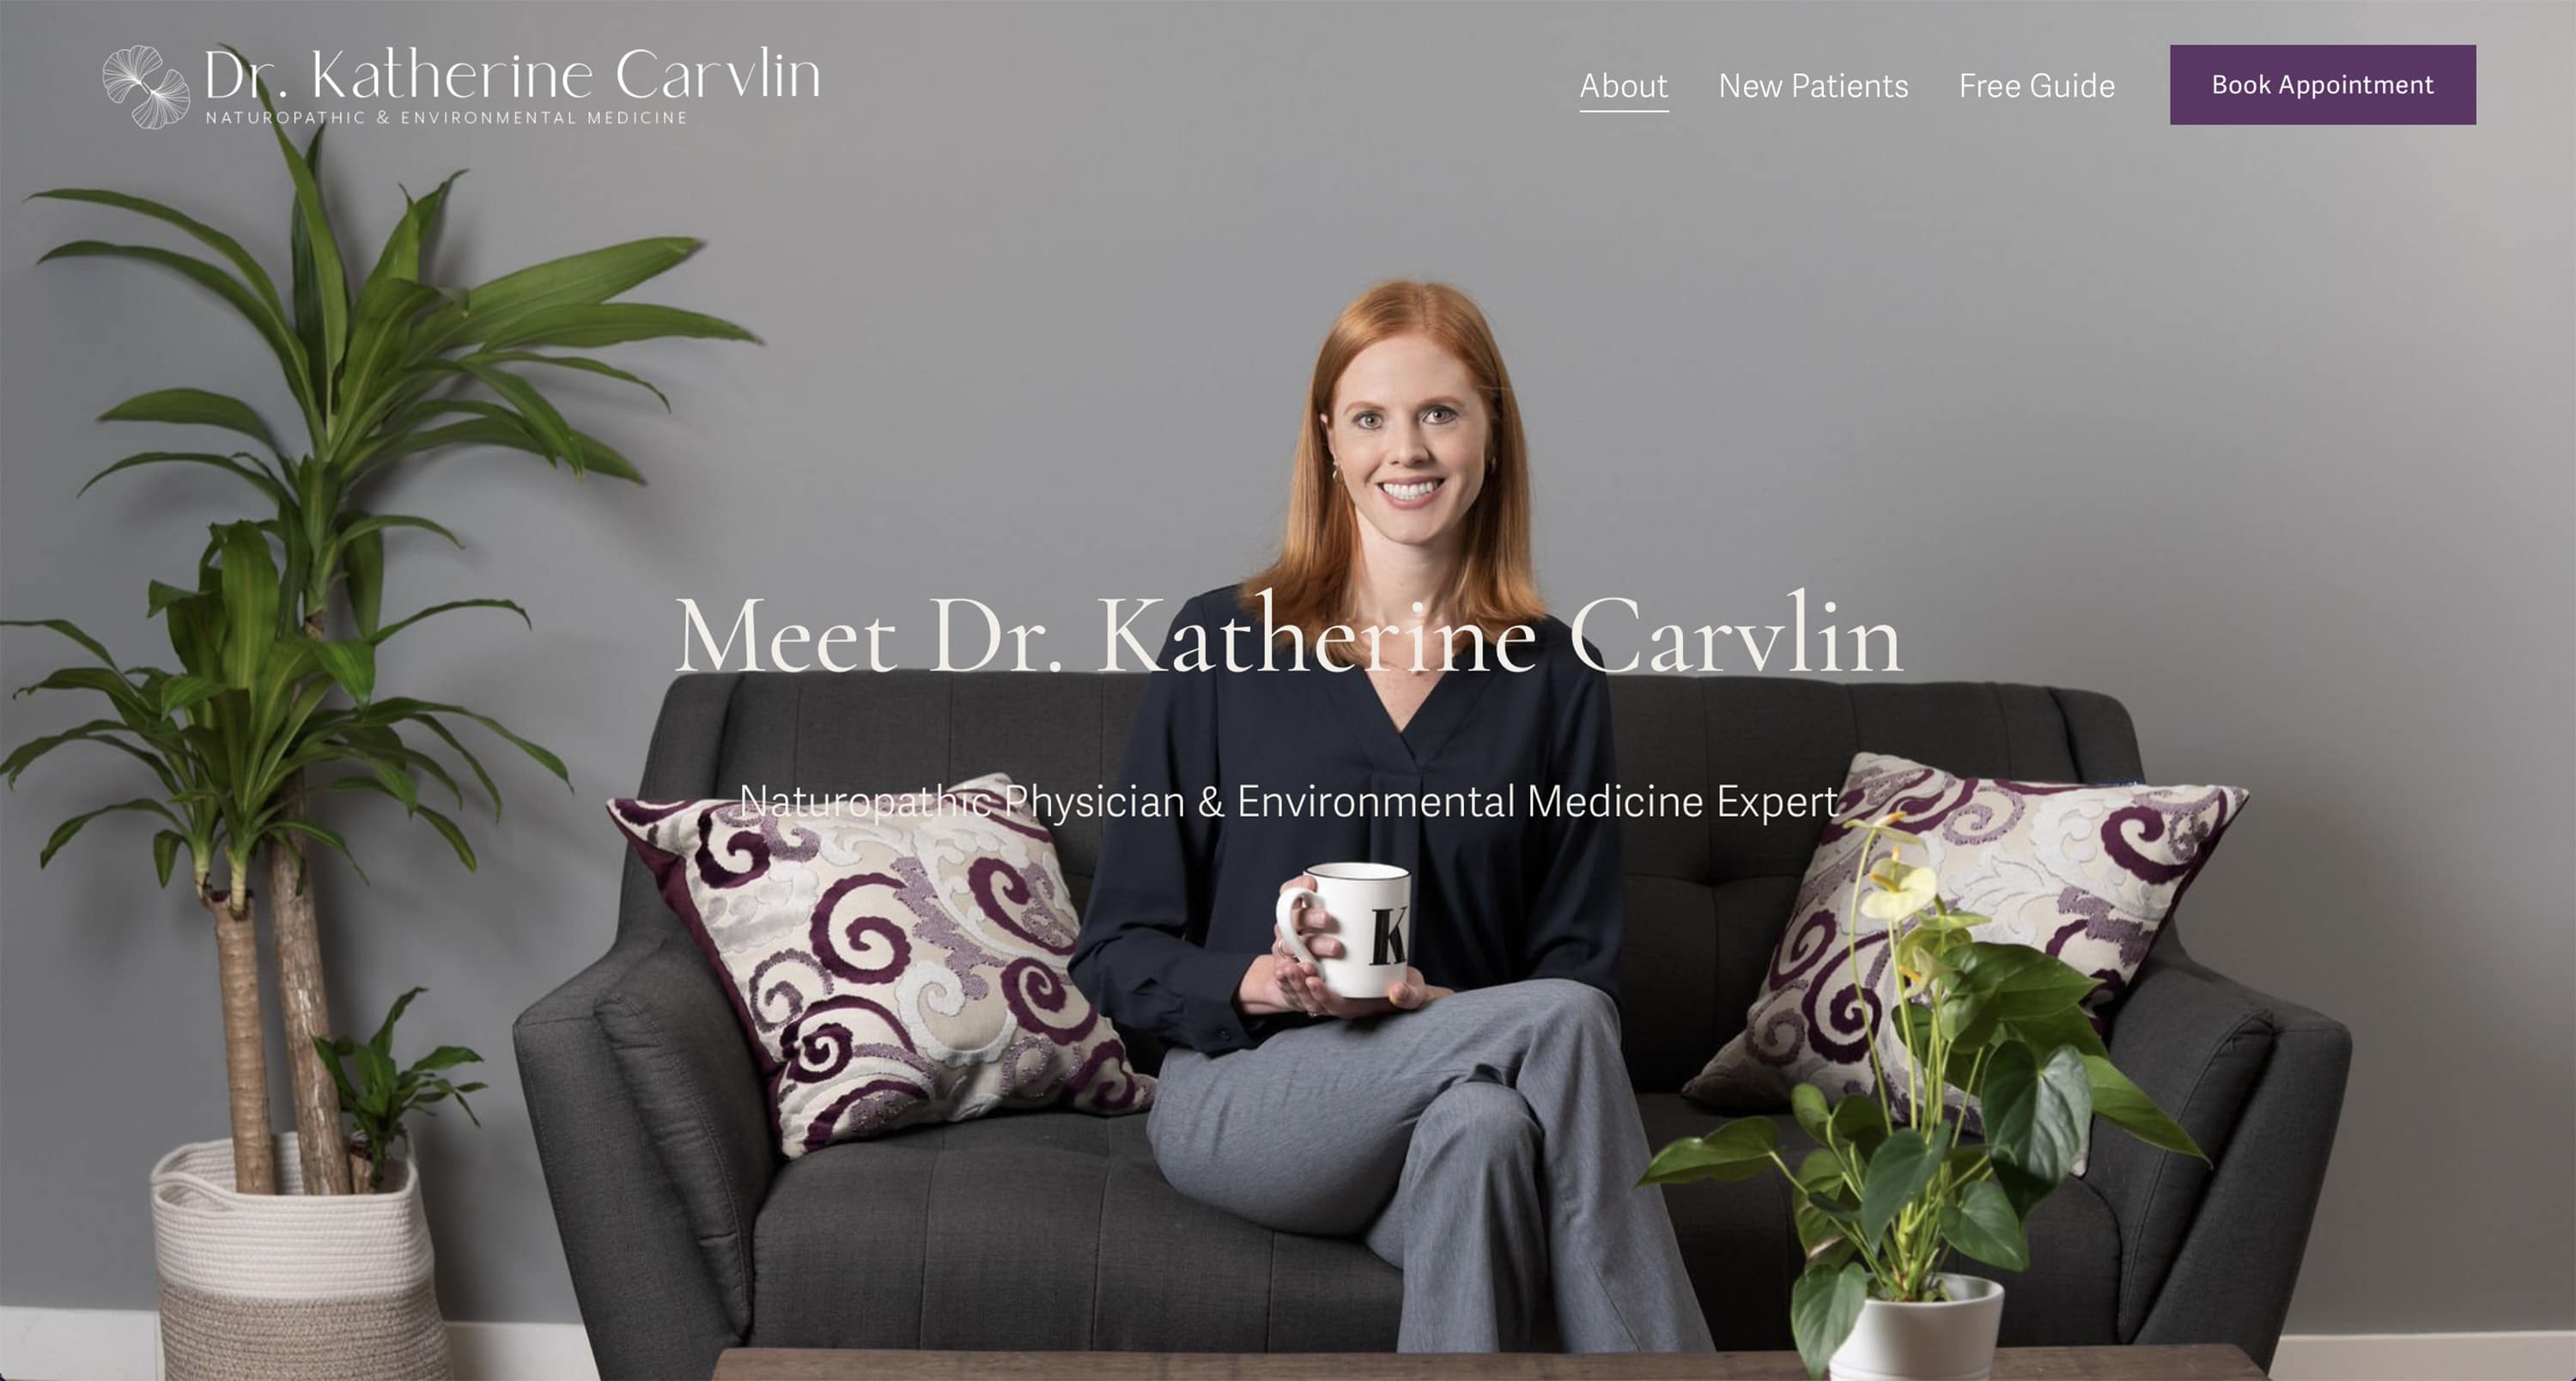 Photo of a doctor on couch used as a banner image on a professional website.